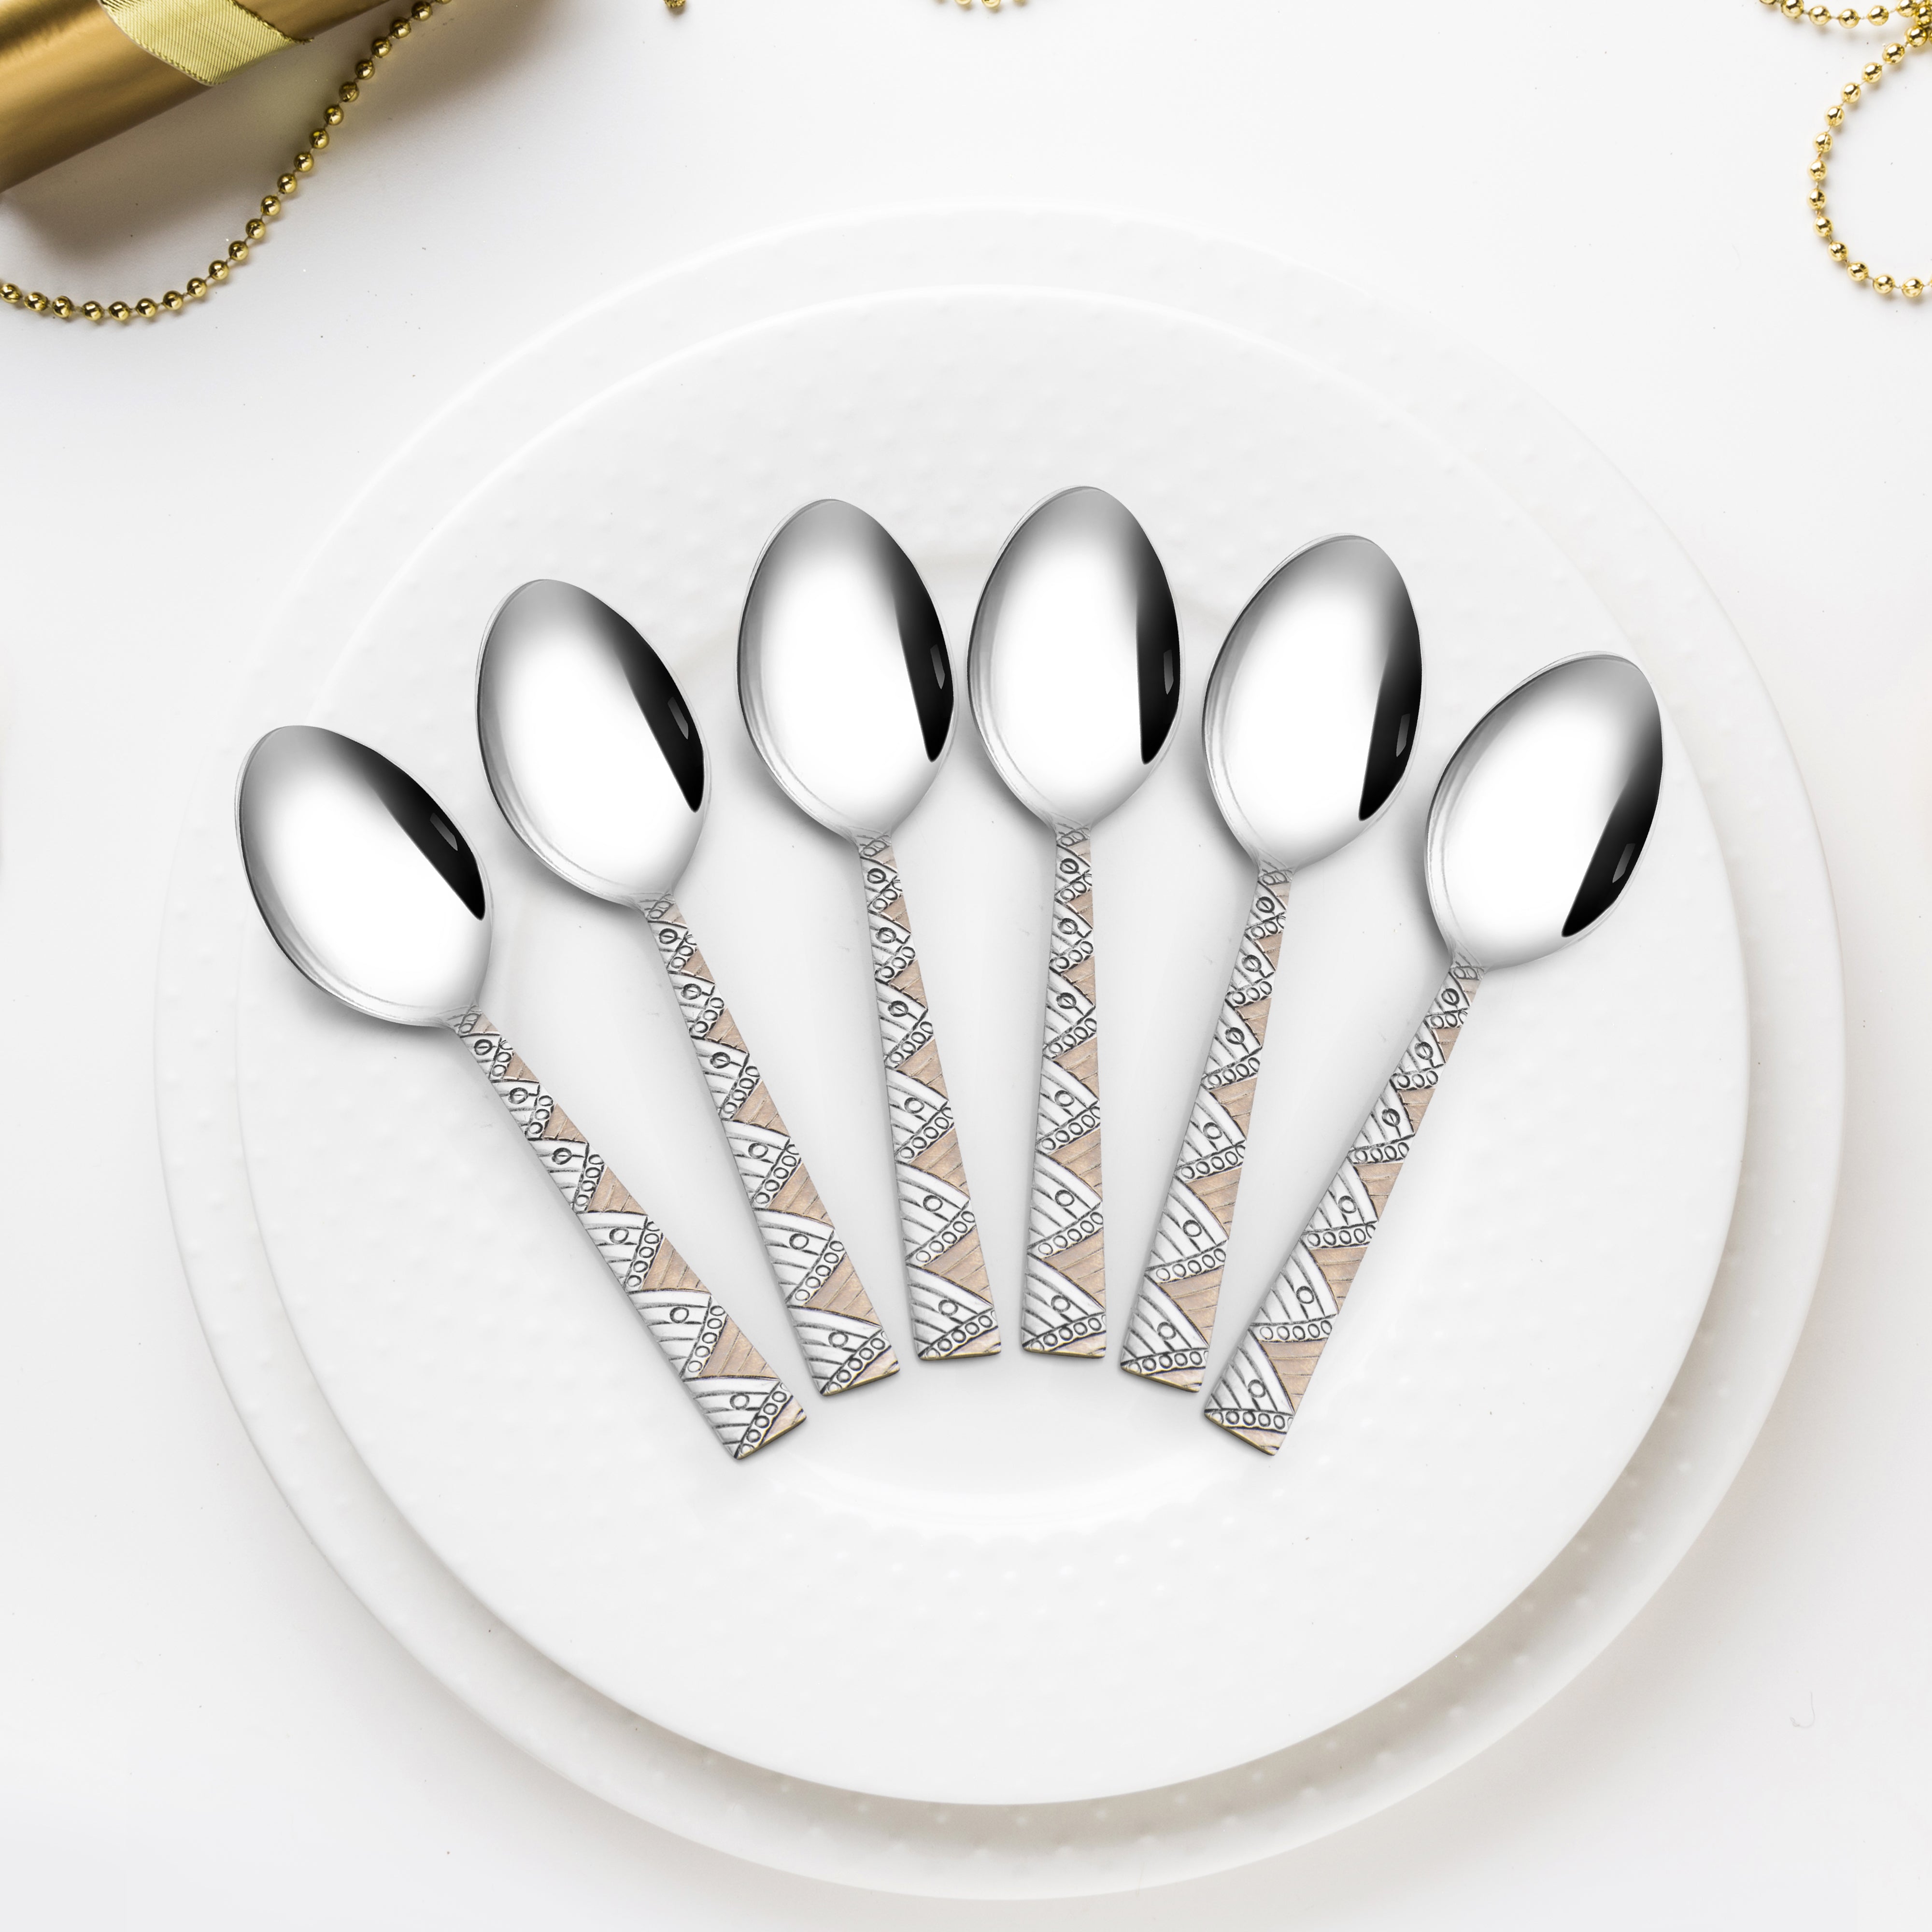 Arias Bloom Baby Spoon Set of 6 (Silver)